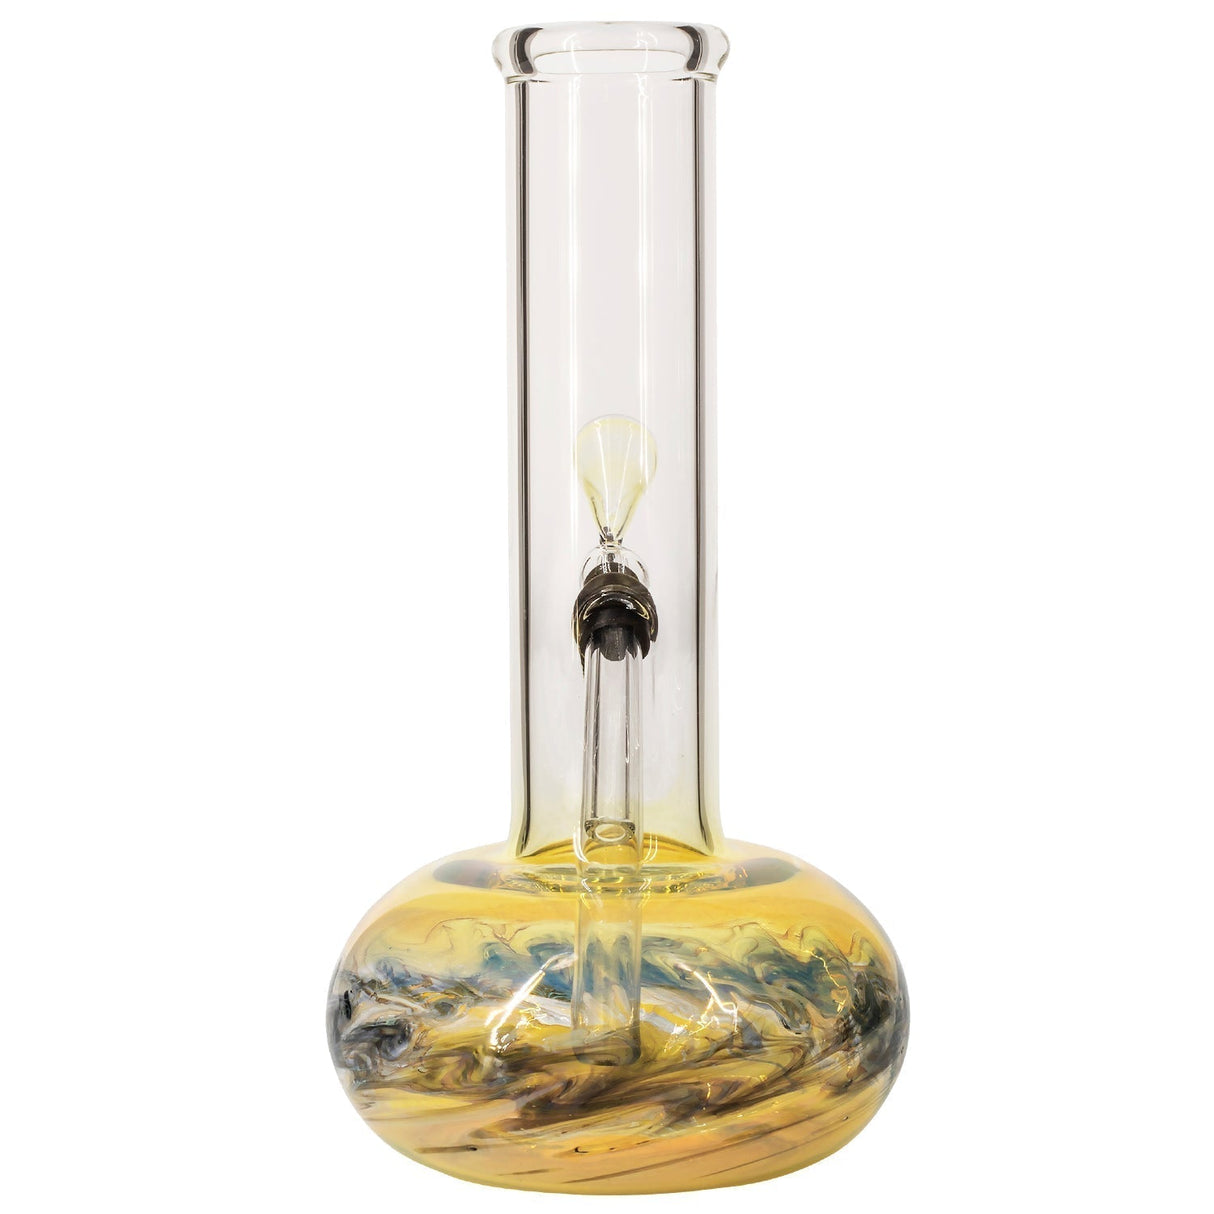 LA Pipes Raked Bubble Bong with Fumed Base, 11" Borosilicate Glass, Front View on White Background